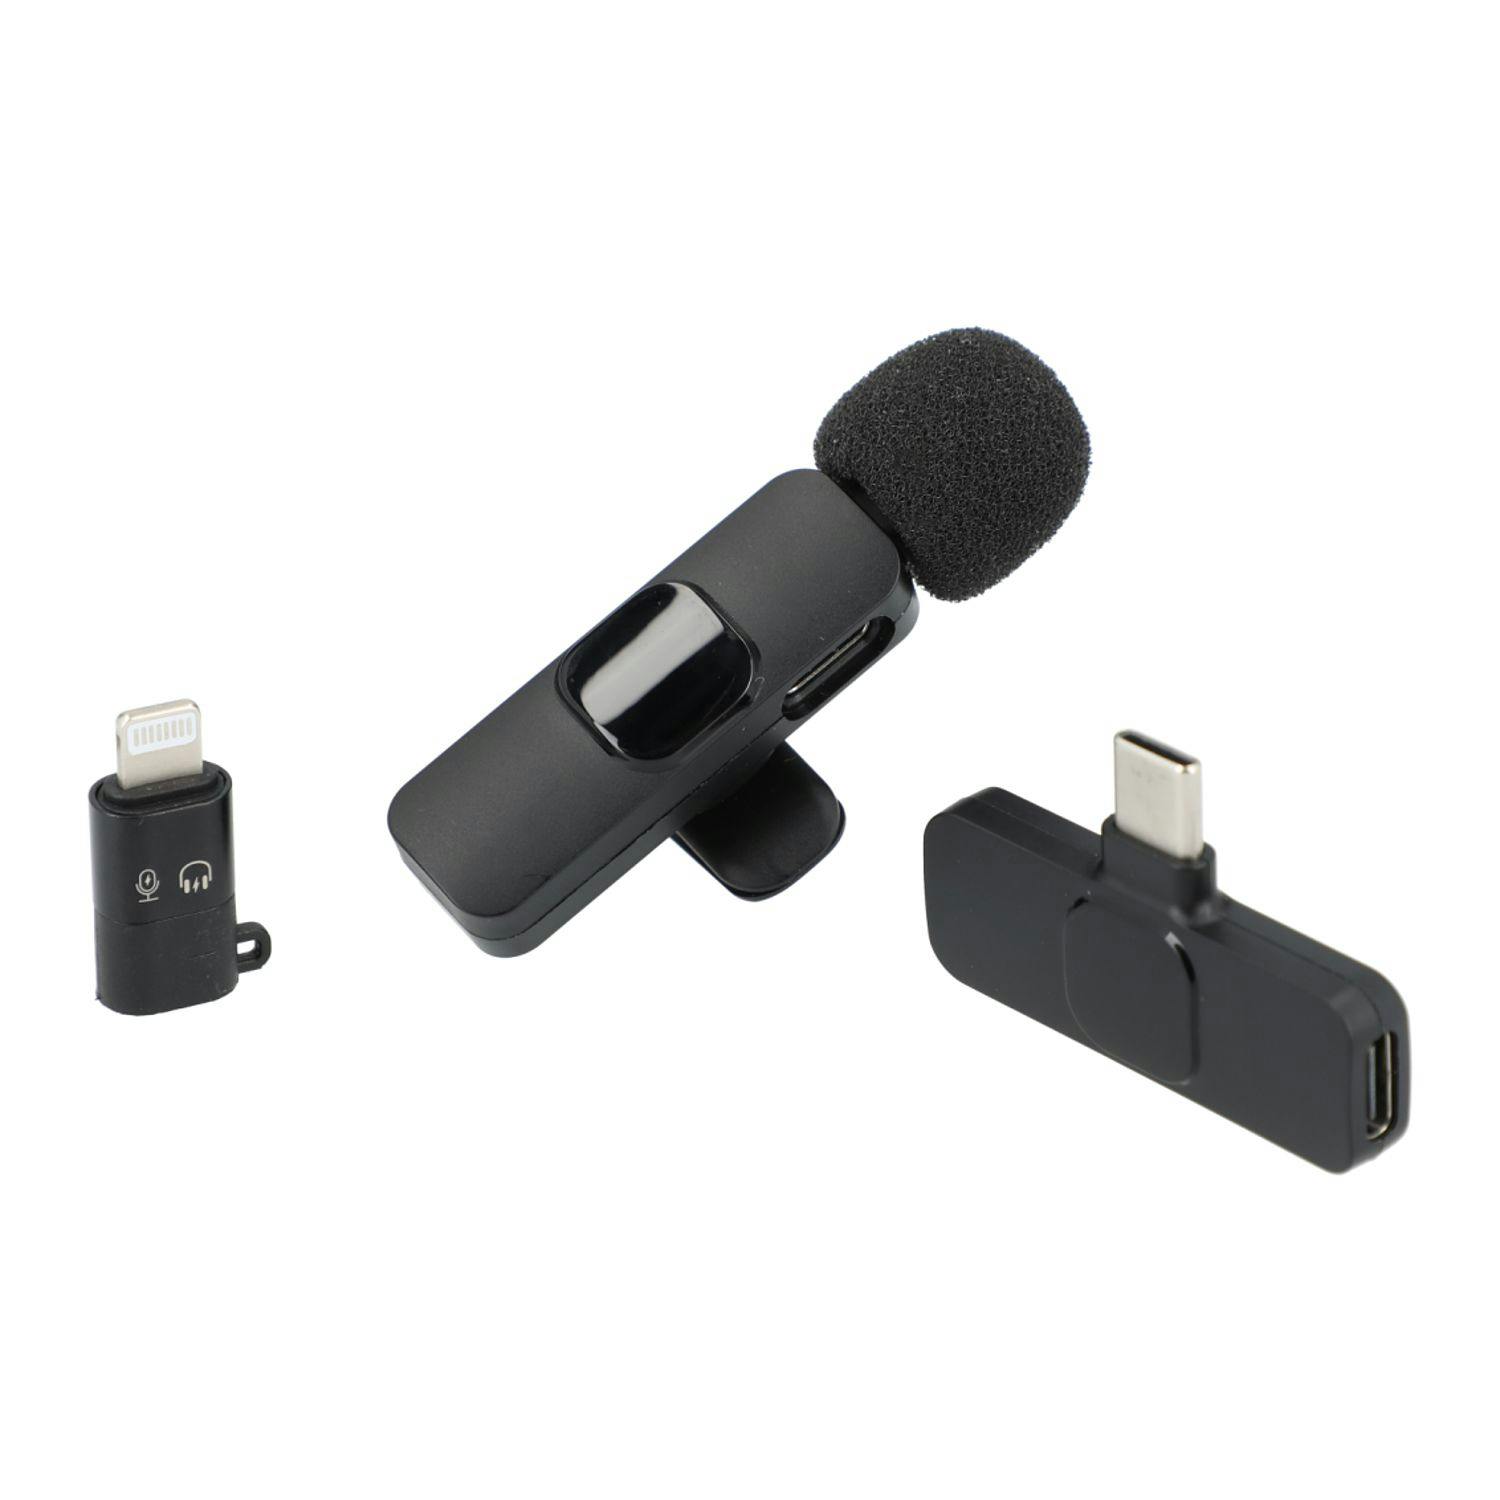 Duo Talk Wireless Microphone - additional Image 1